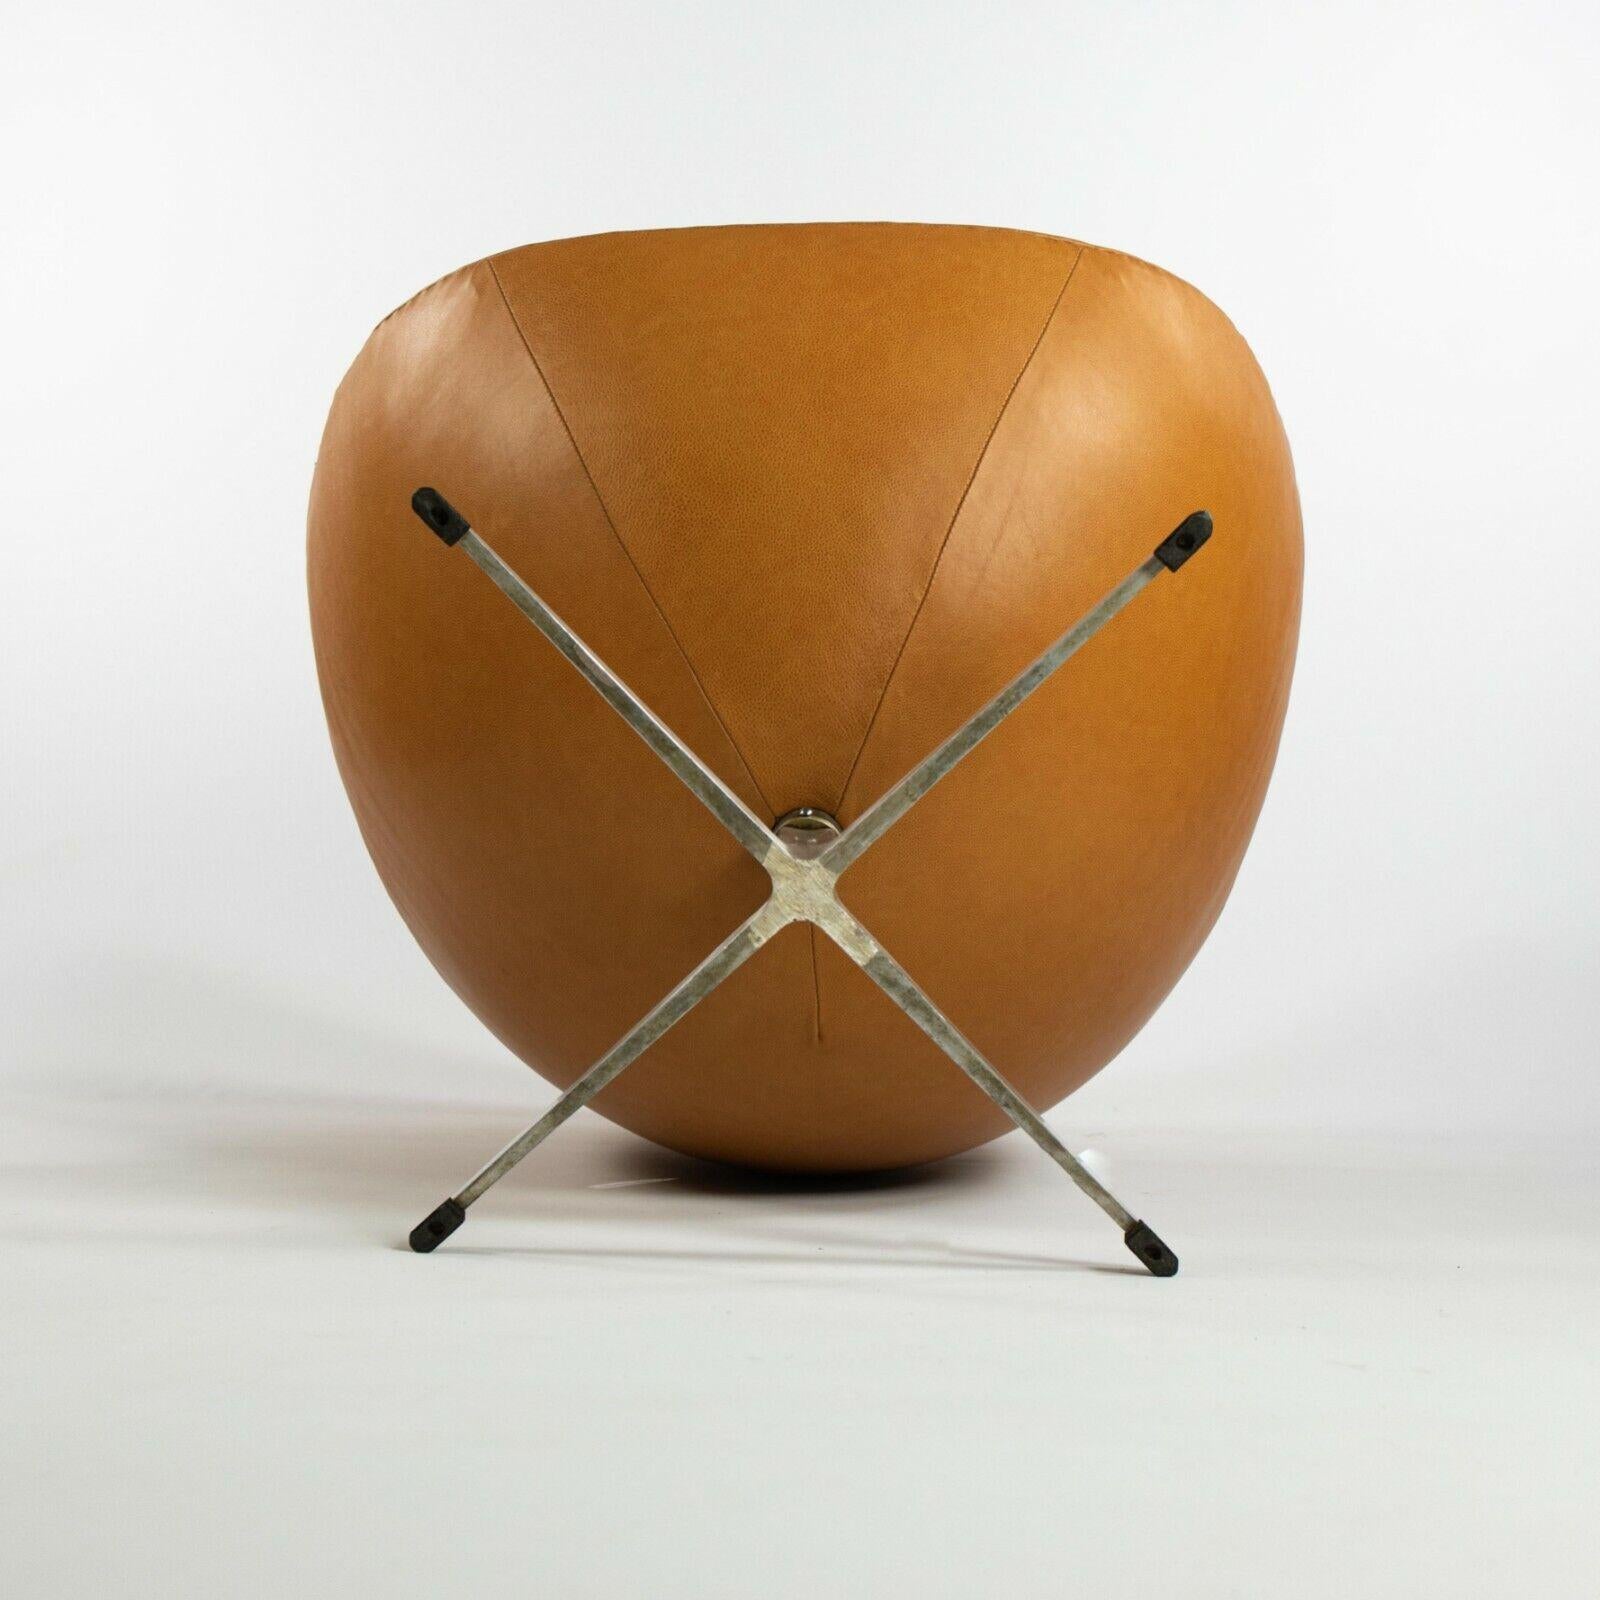 We present an exceptionally rare and original egg chair and ottoman, designed by Arne Jacobsen and produced by Fritz Hansen in 1959. This set came from a period-correct home and estate in New Jersey full of original George Nakashima furniture, which